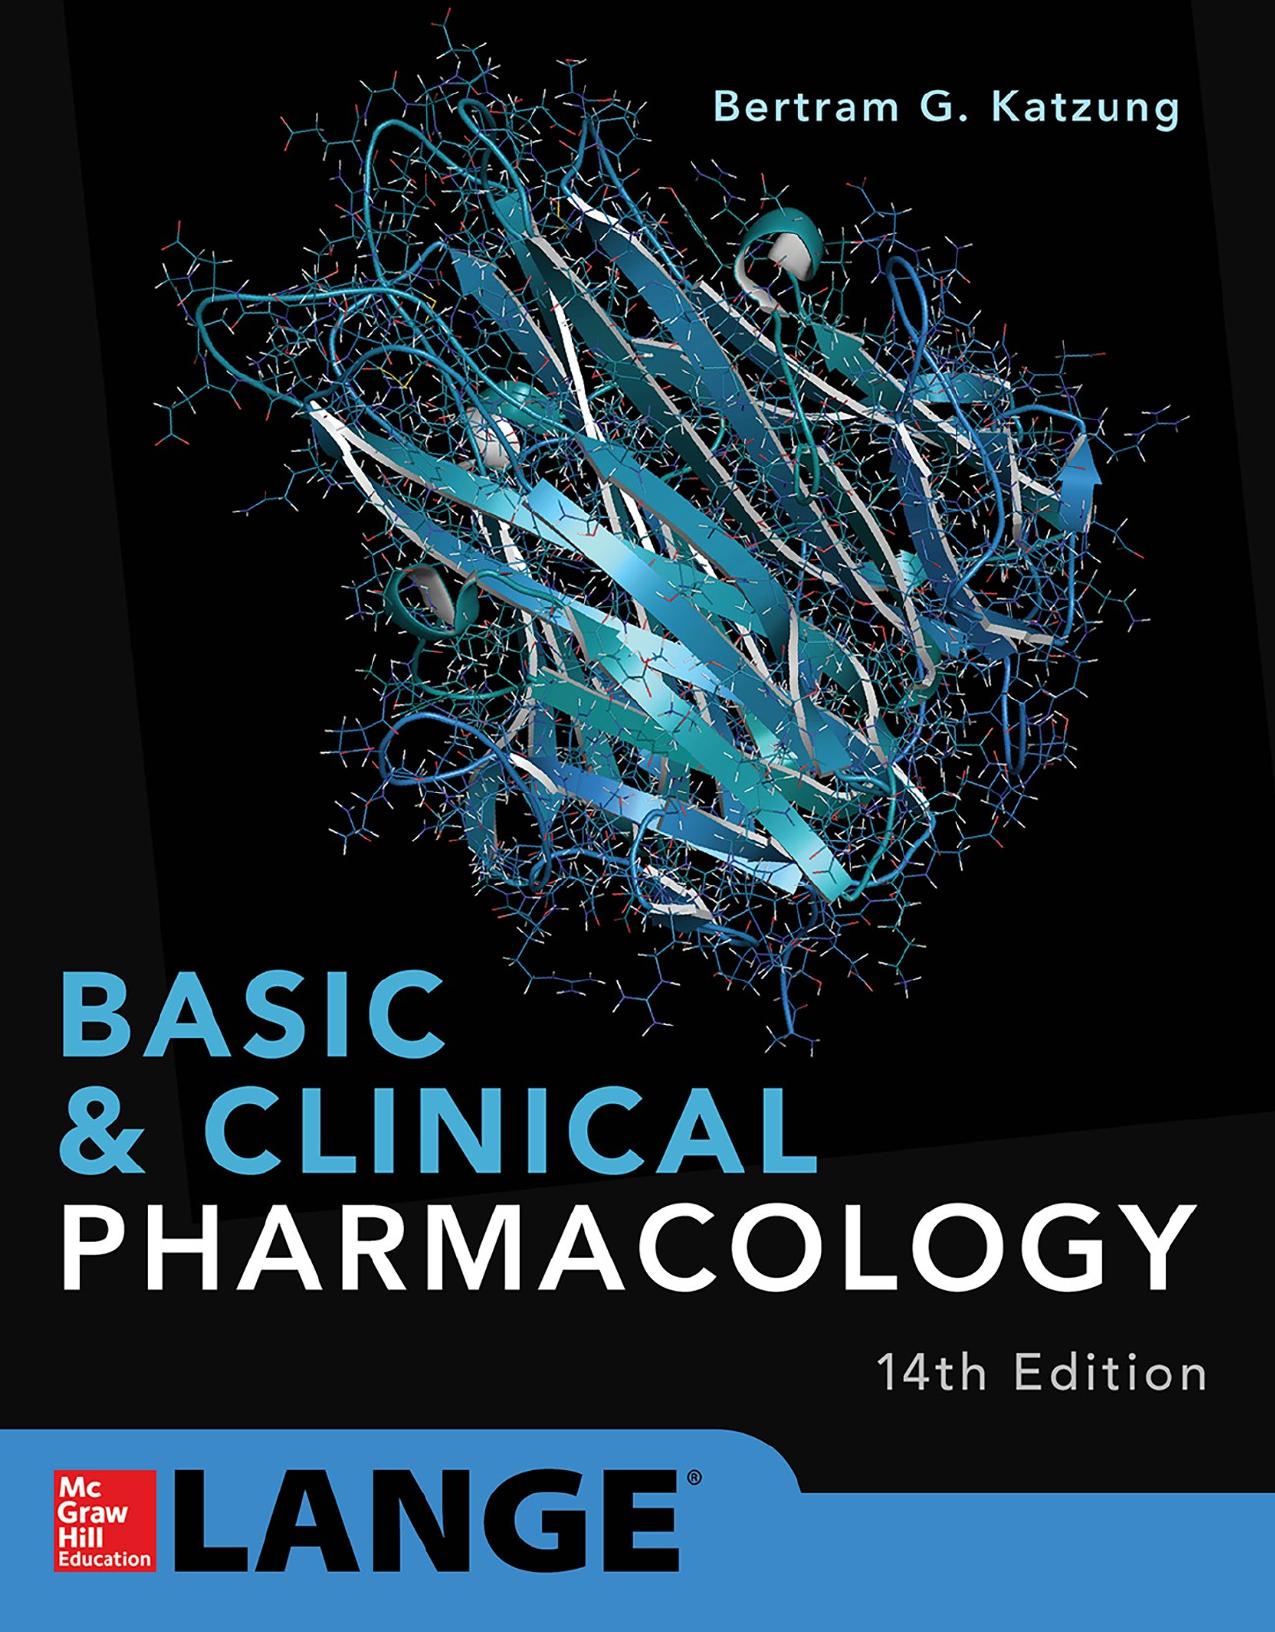 Basic and Clinical Pharmacology, 14th Edition